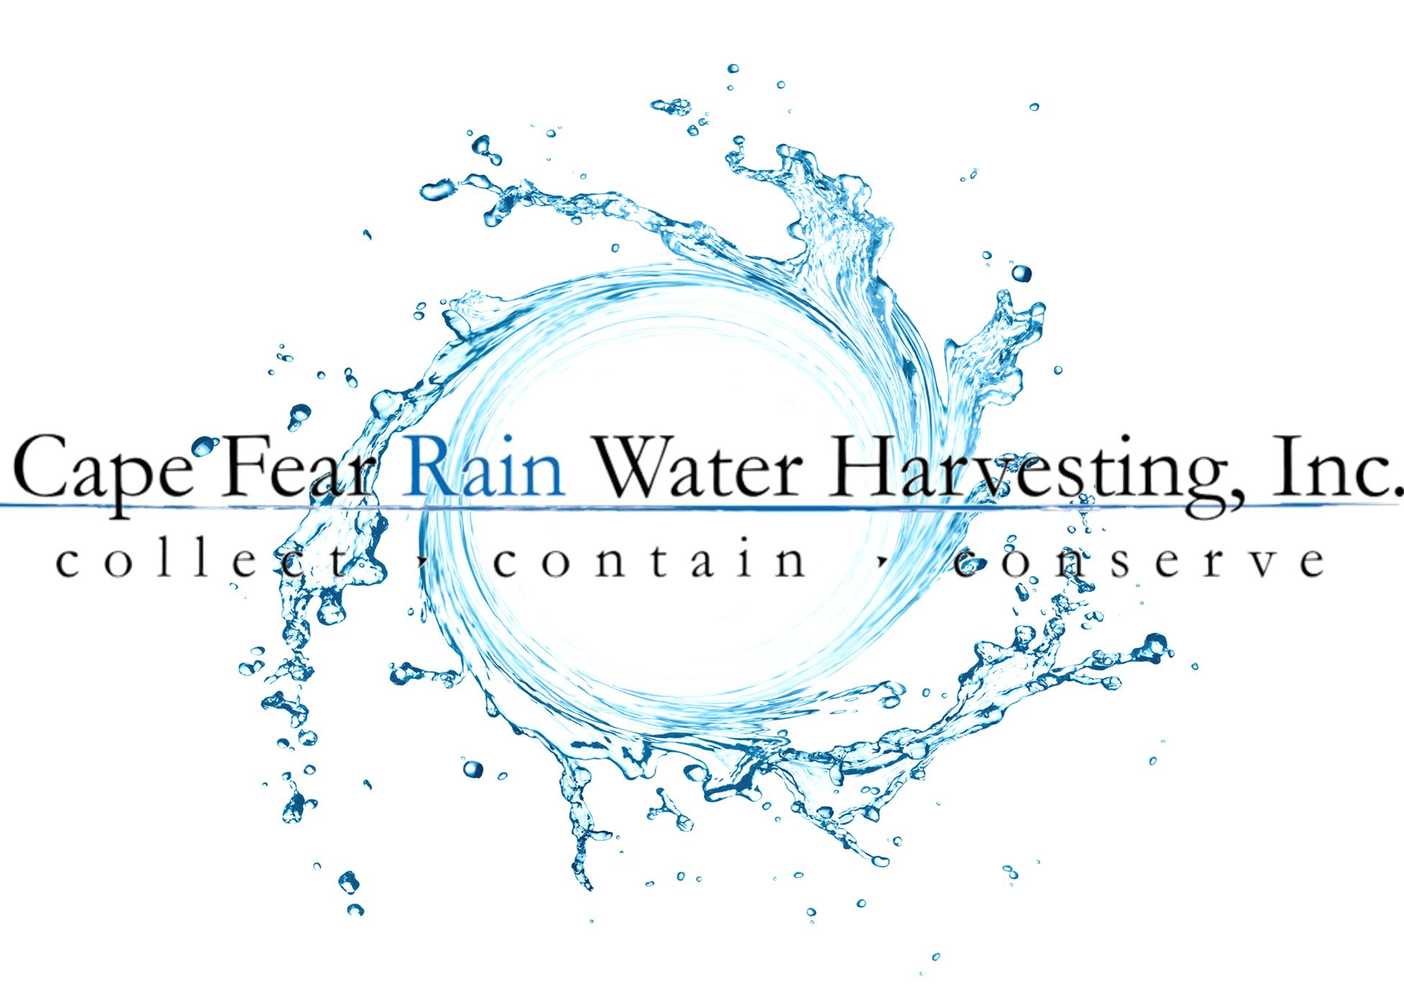 Project photos from Cape Fear Rain Water Harvesting, Inc.